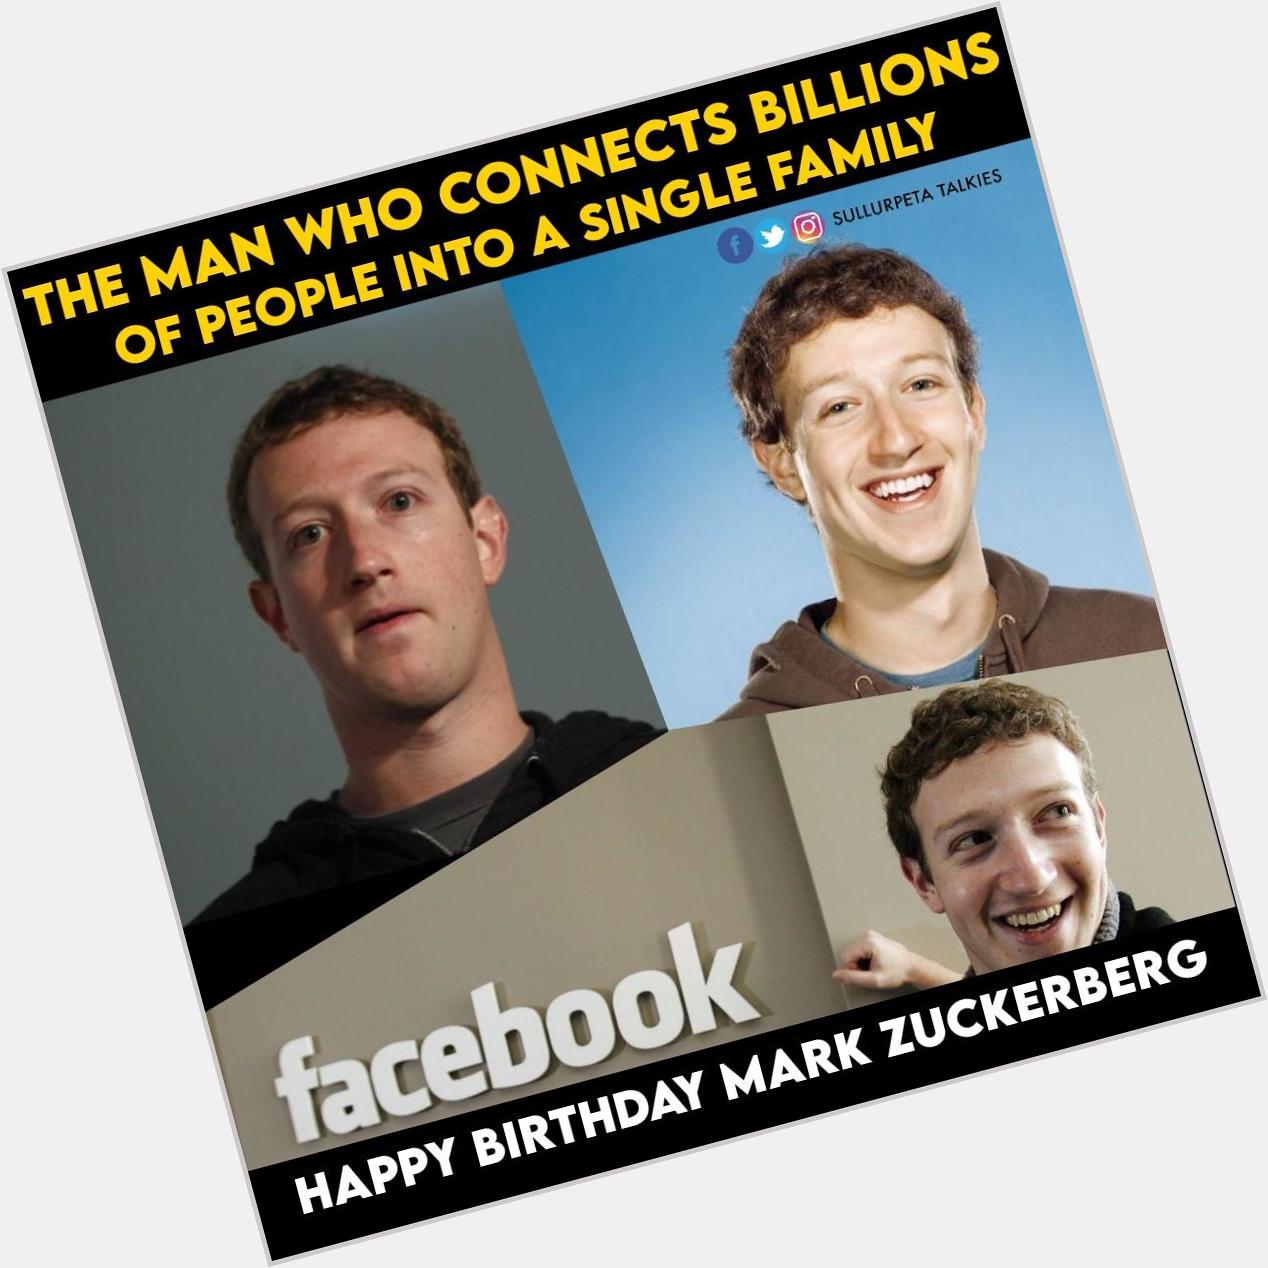  Happy Birthday Mark Zuckerberg The Man who connects billions of people\s in Single Family  